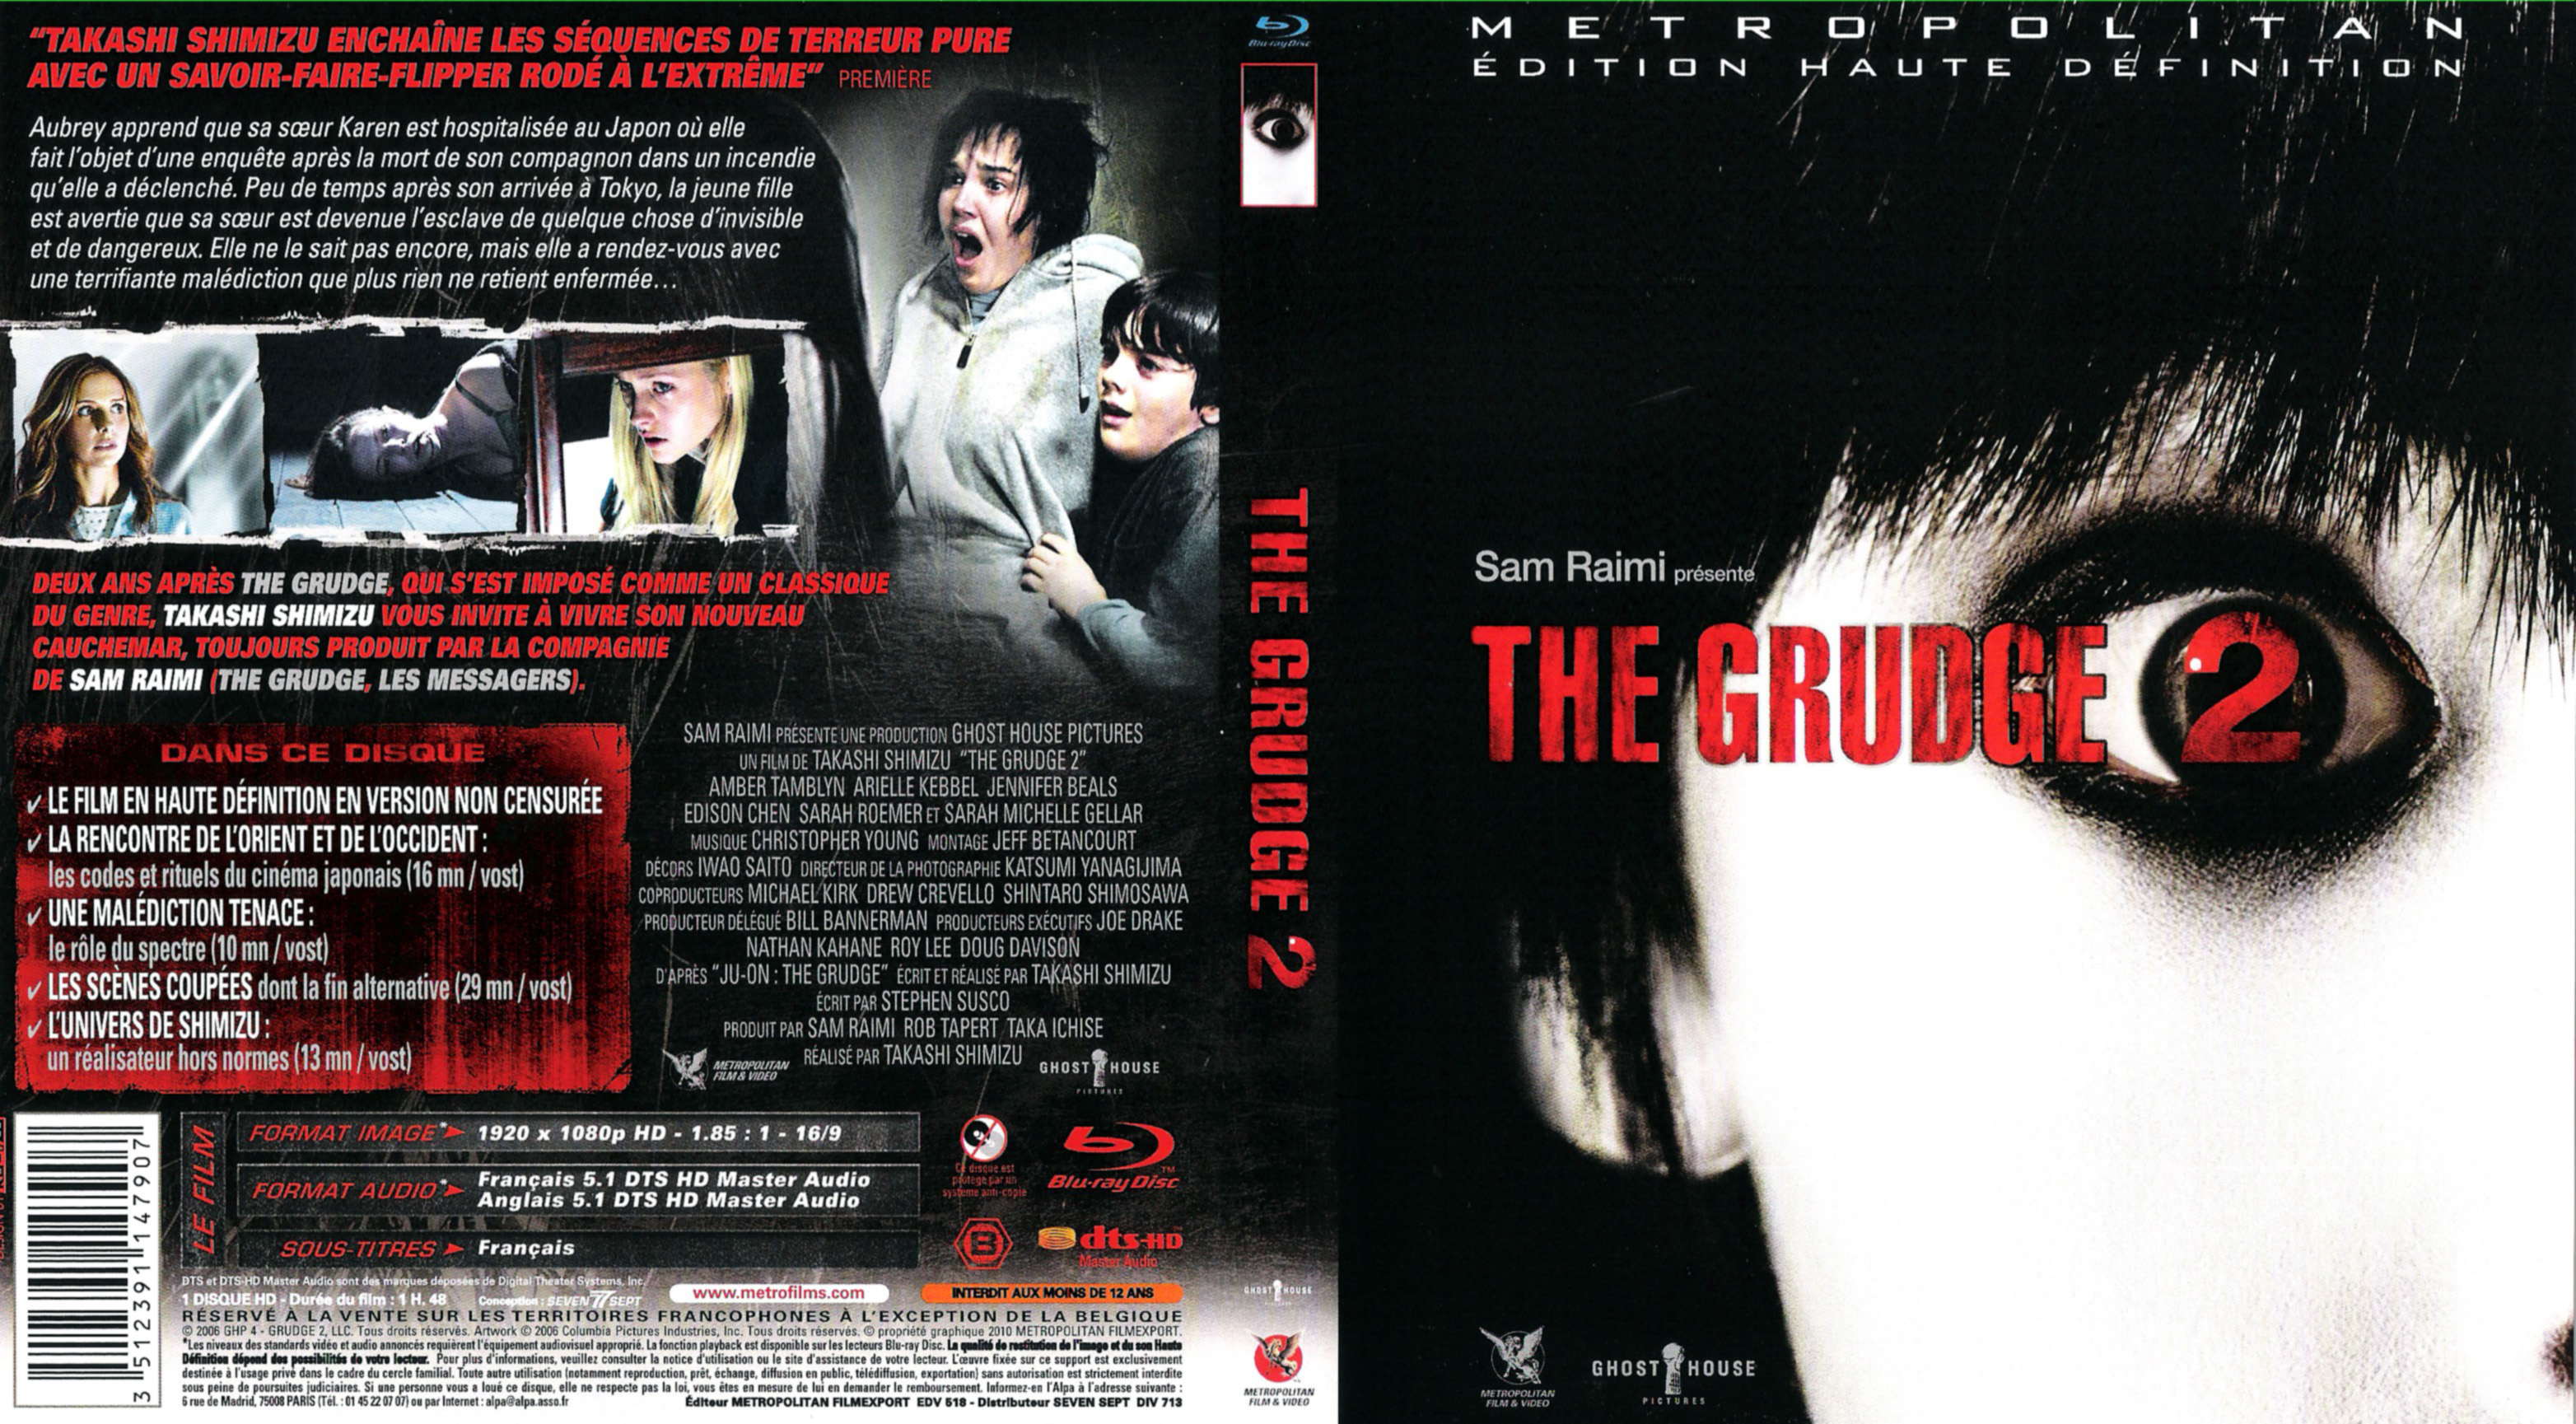 Jaquette DVD The grudge 2 (BLU-RAY)